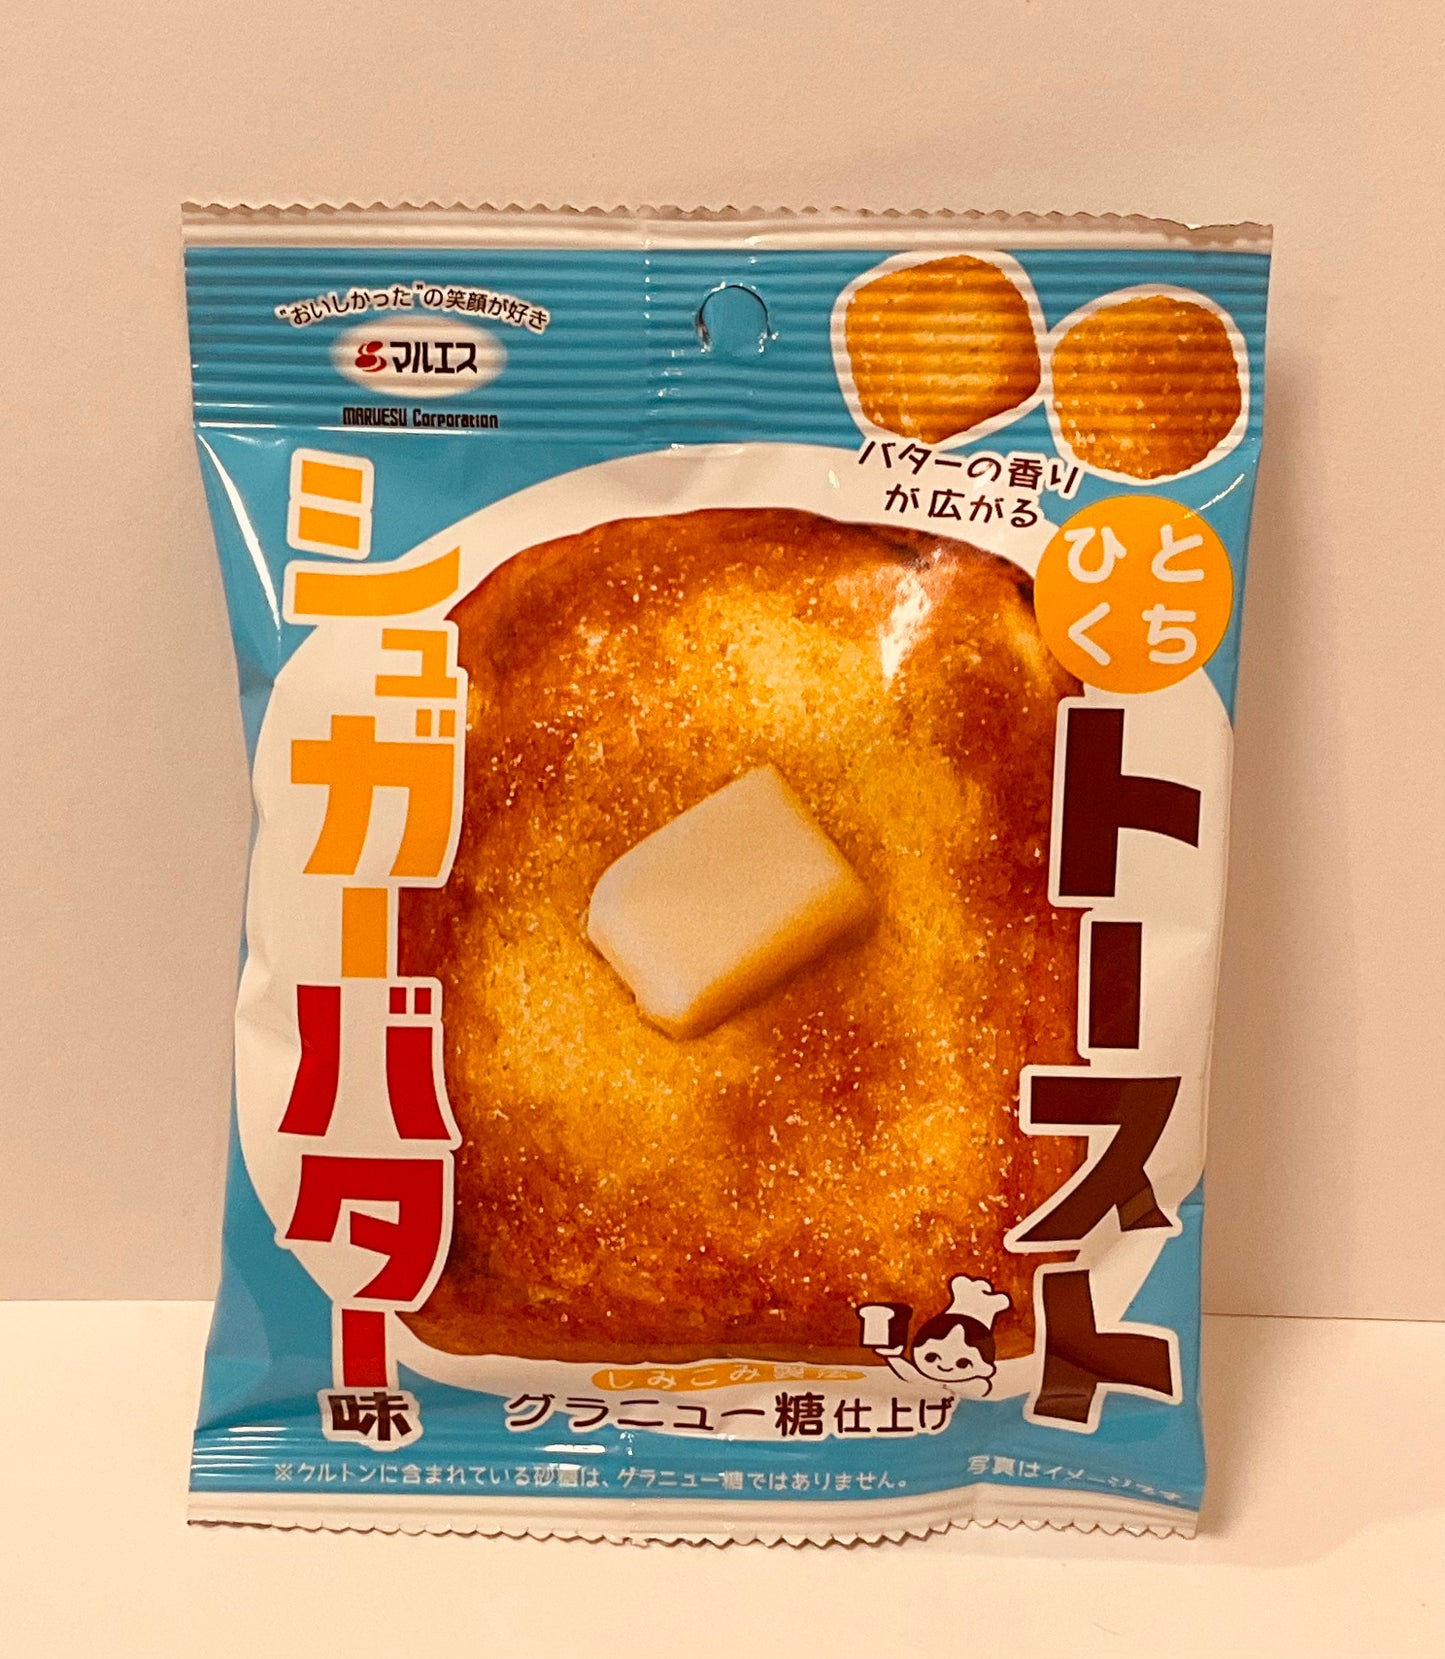 Bite-sized toast, sugar butter flavour